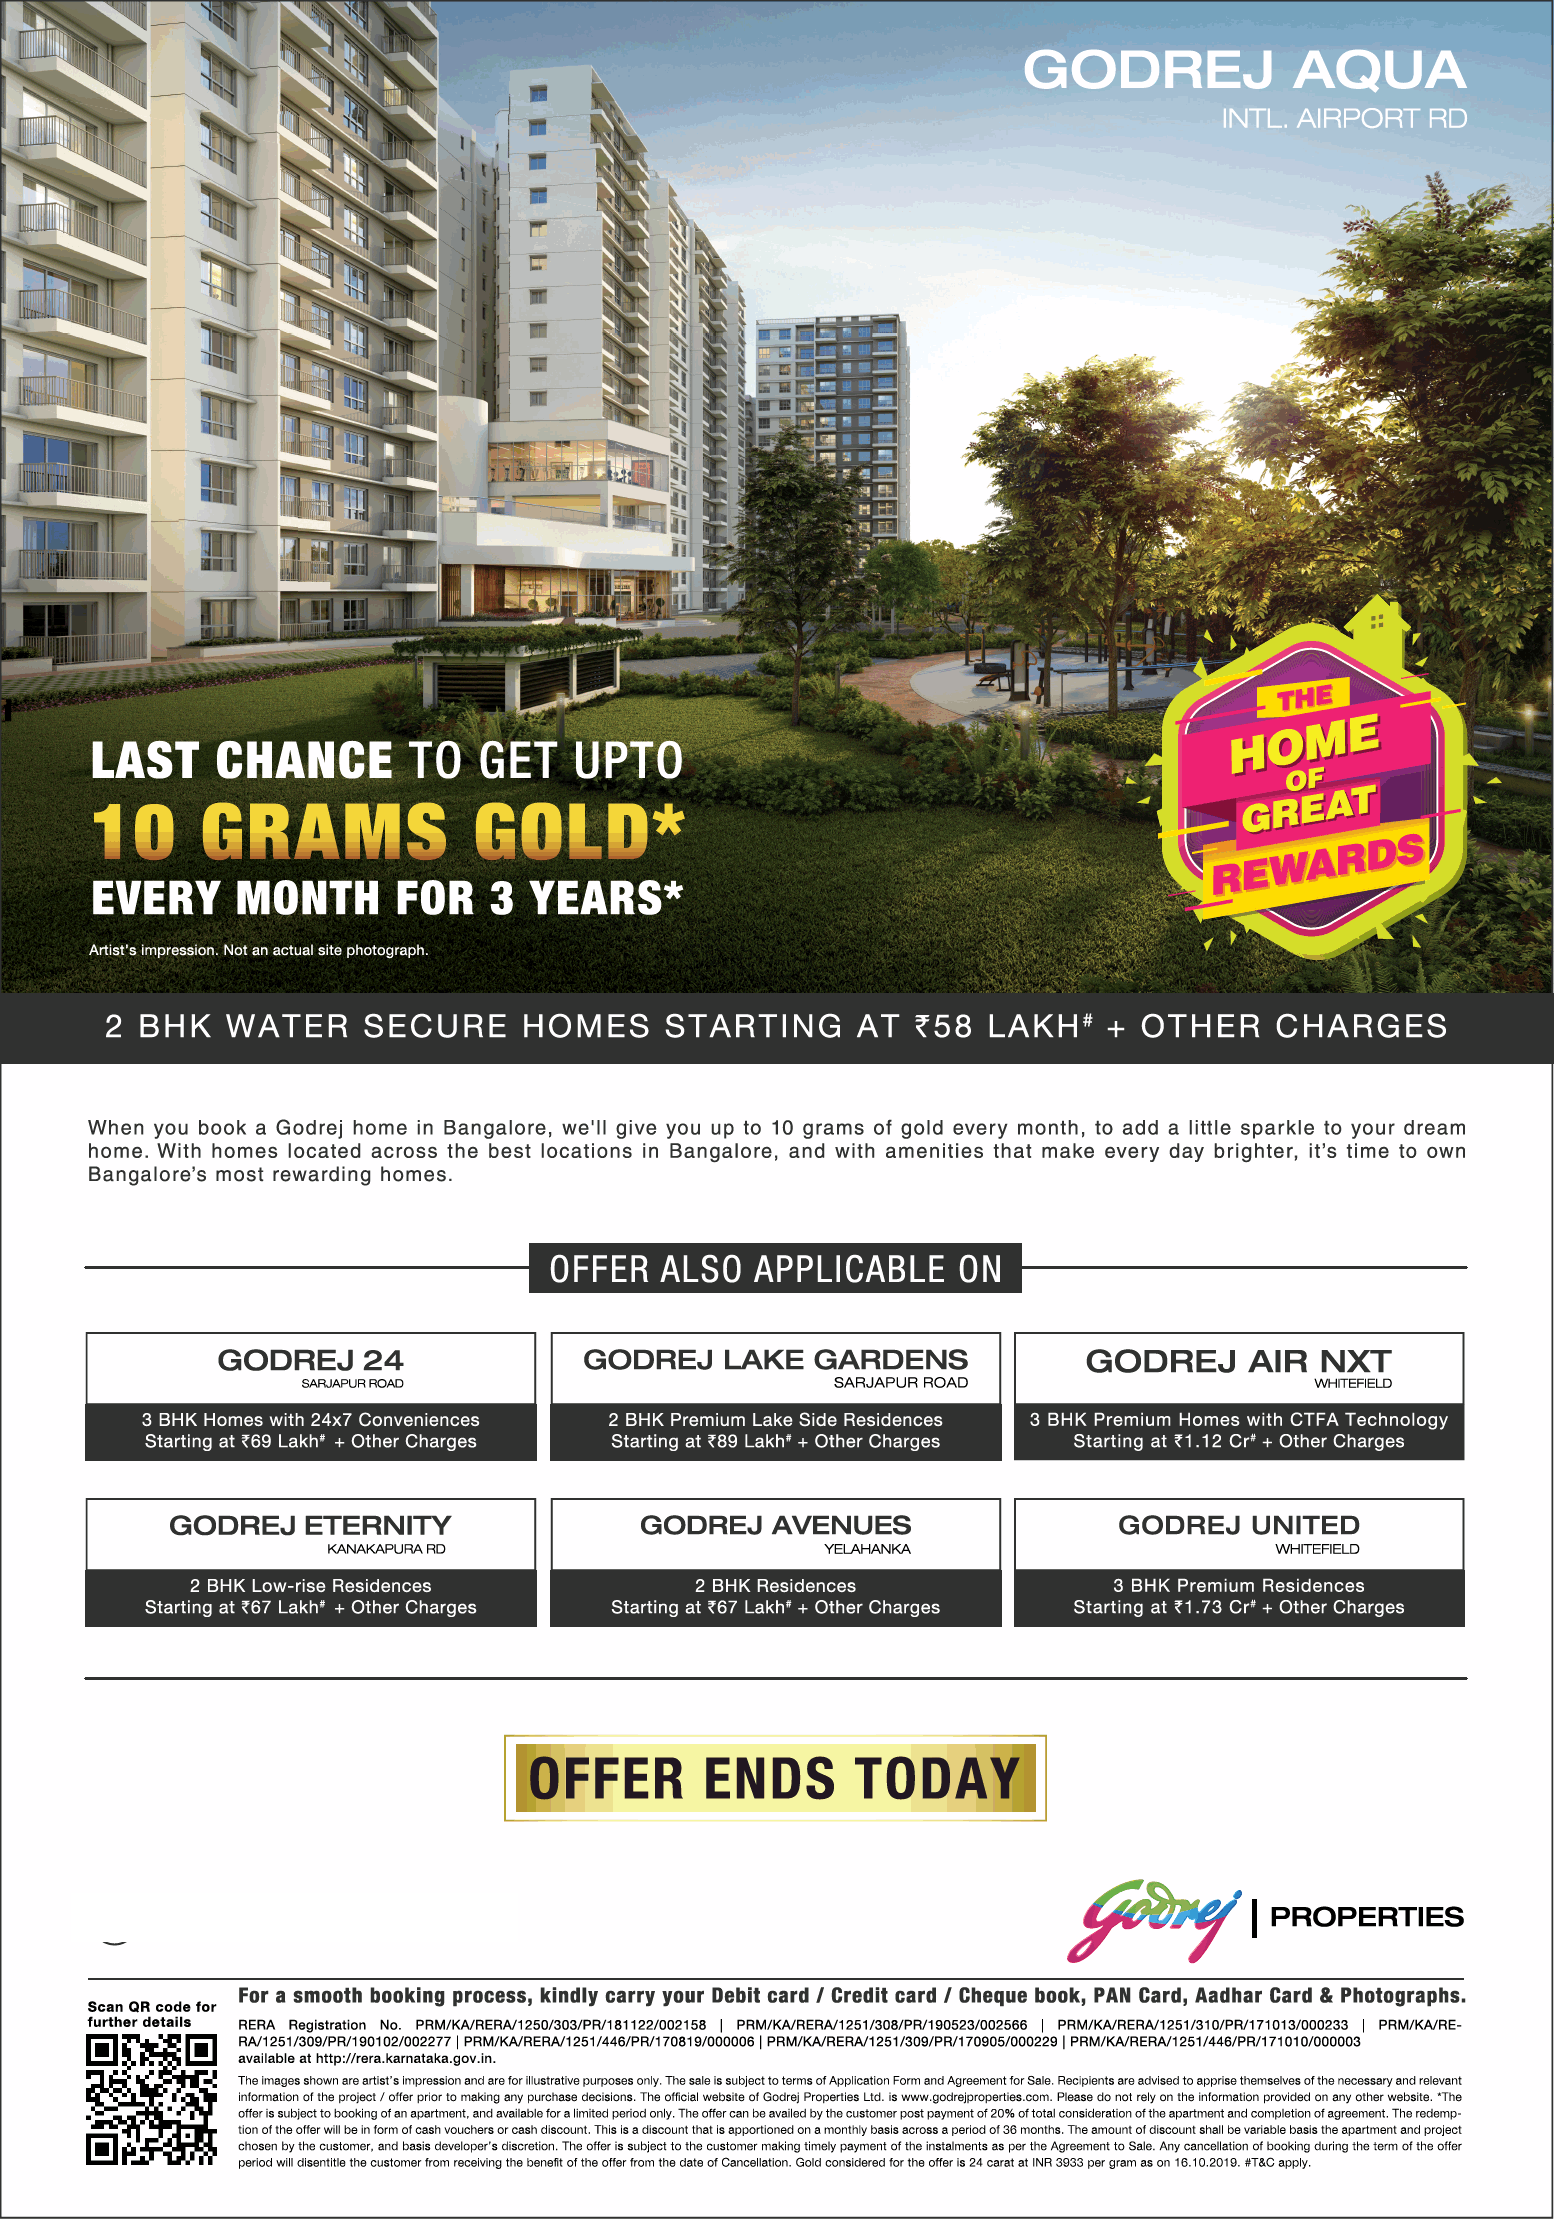 Last chance to get upto 10 grams gold every month for 3 years at Godrej Properties